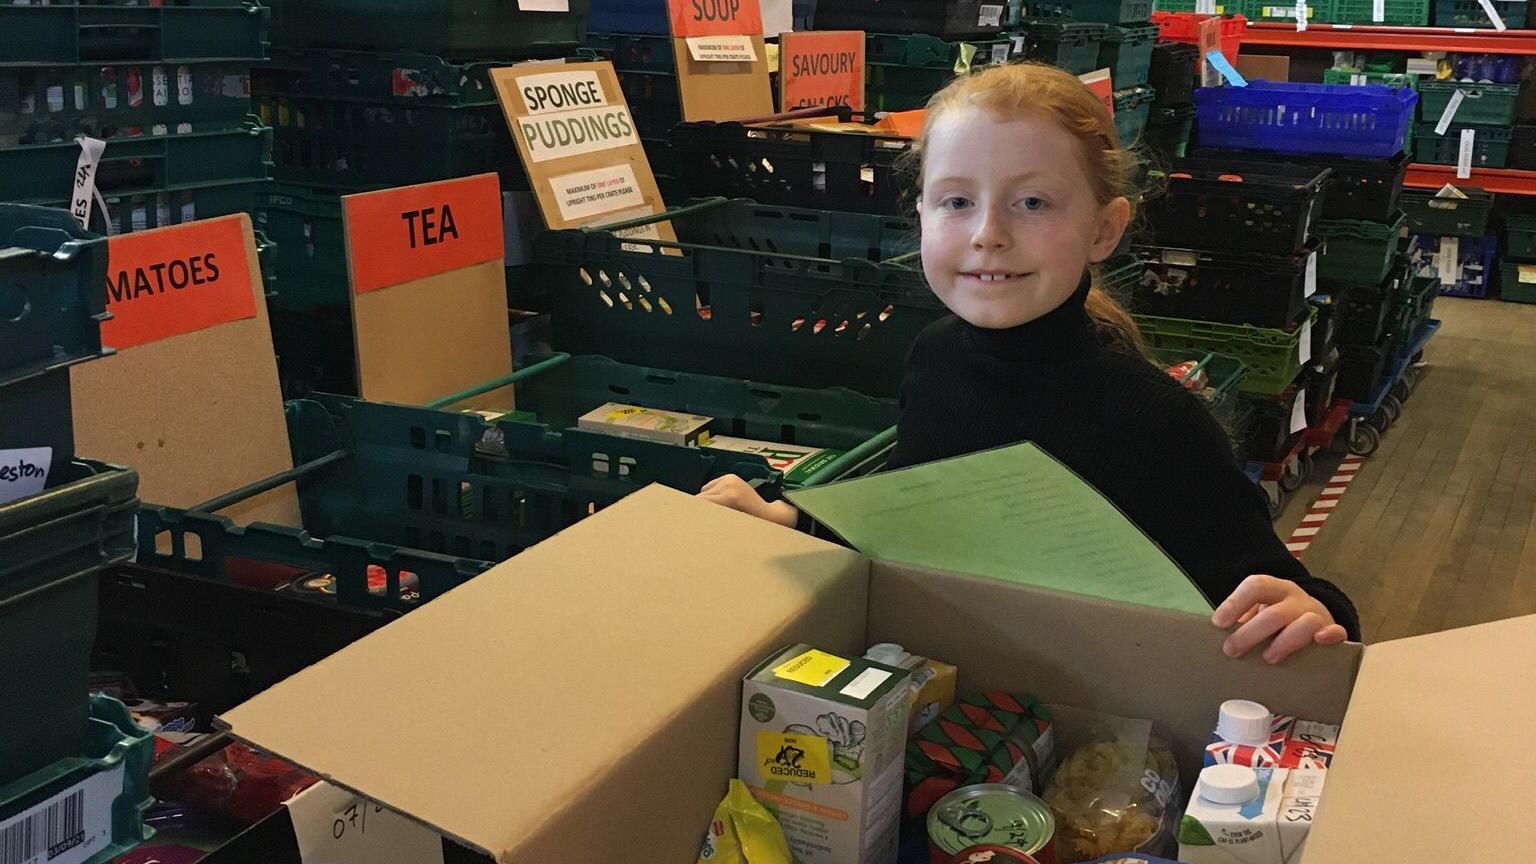 Image of Luna volunteering at the food bank. She is packing items into a cardboard box